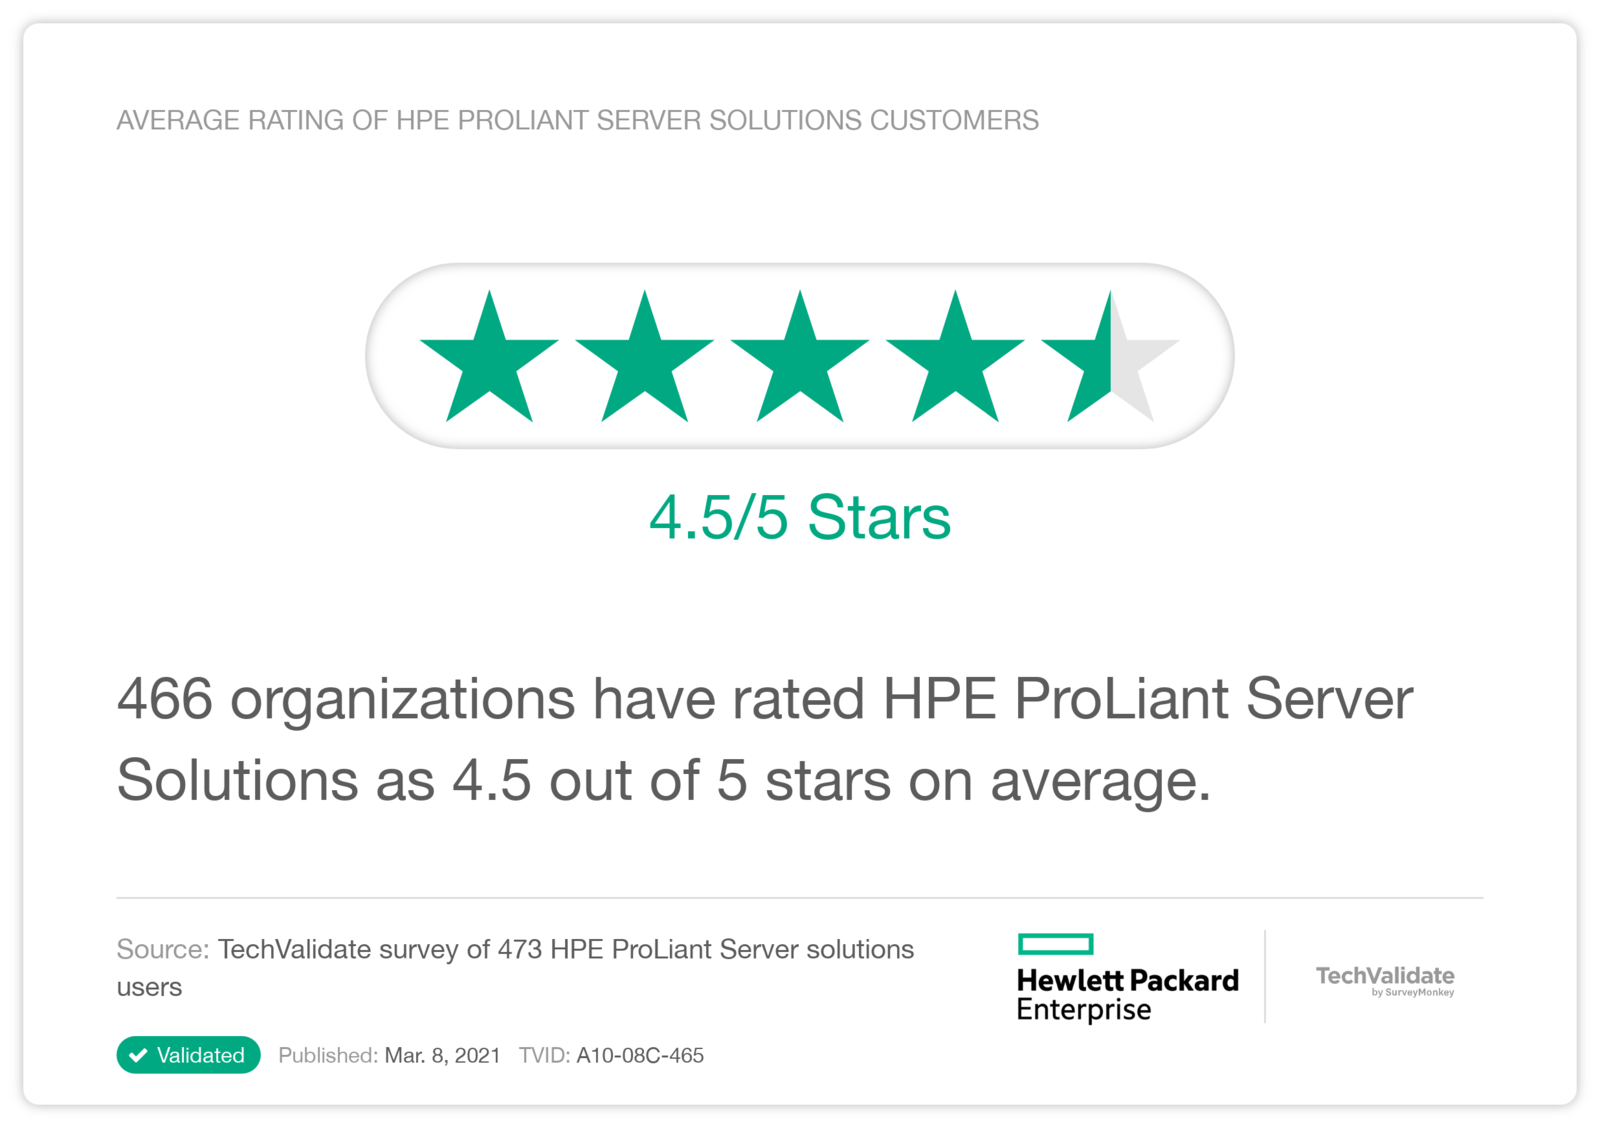 Average Rating of HPE ProLiant Server solutions Customers